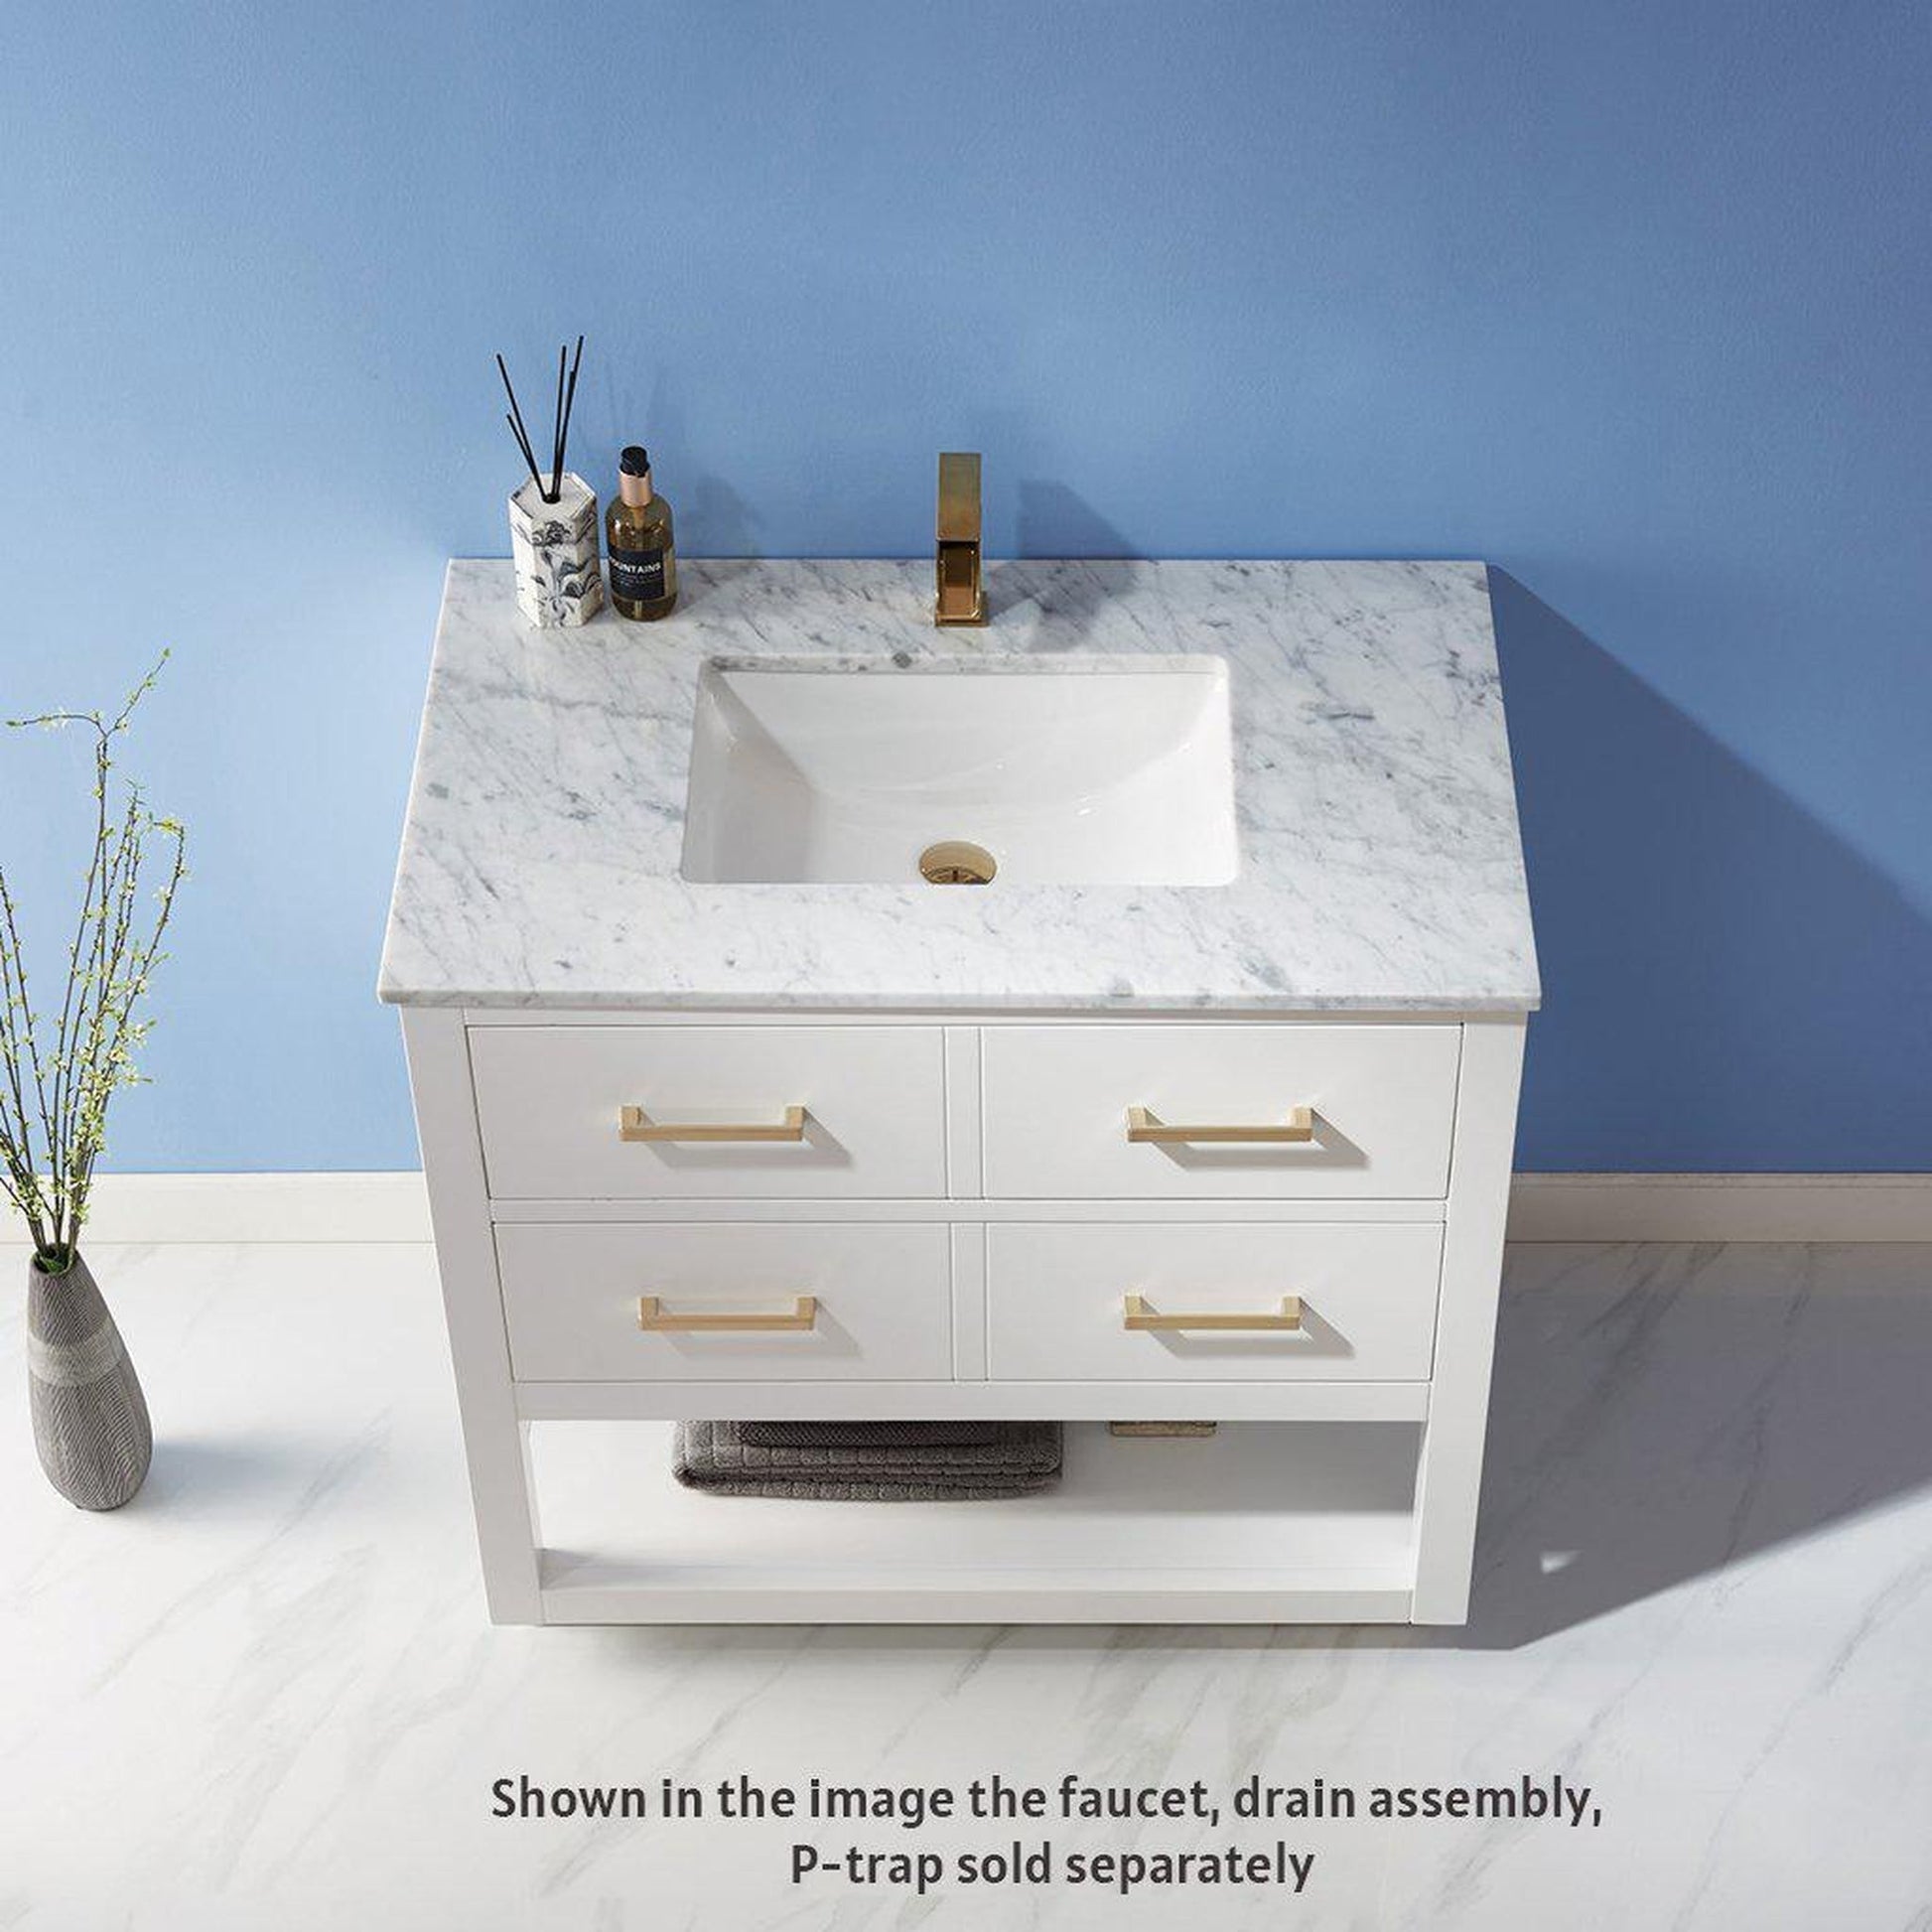 Altair Remi 36" Single White Freestanding Bathroom Vanity Set With Natural Carrara White Marble Top, Rectangular Undermount Ceramic Sink, and Overflow